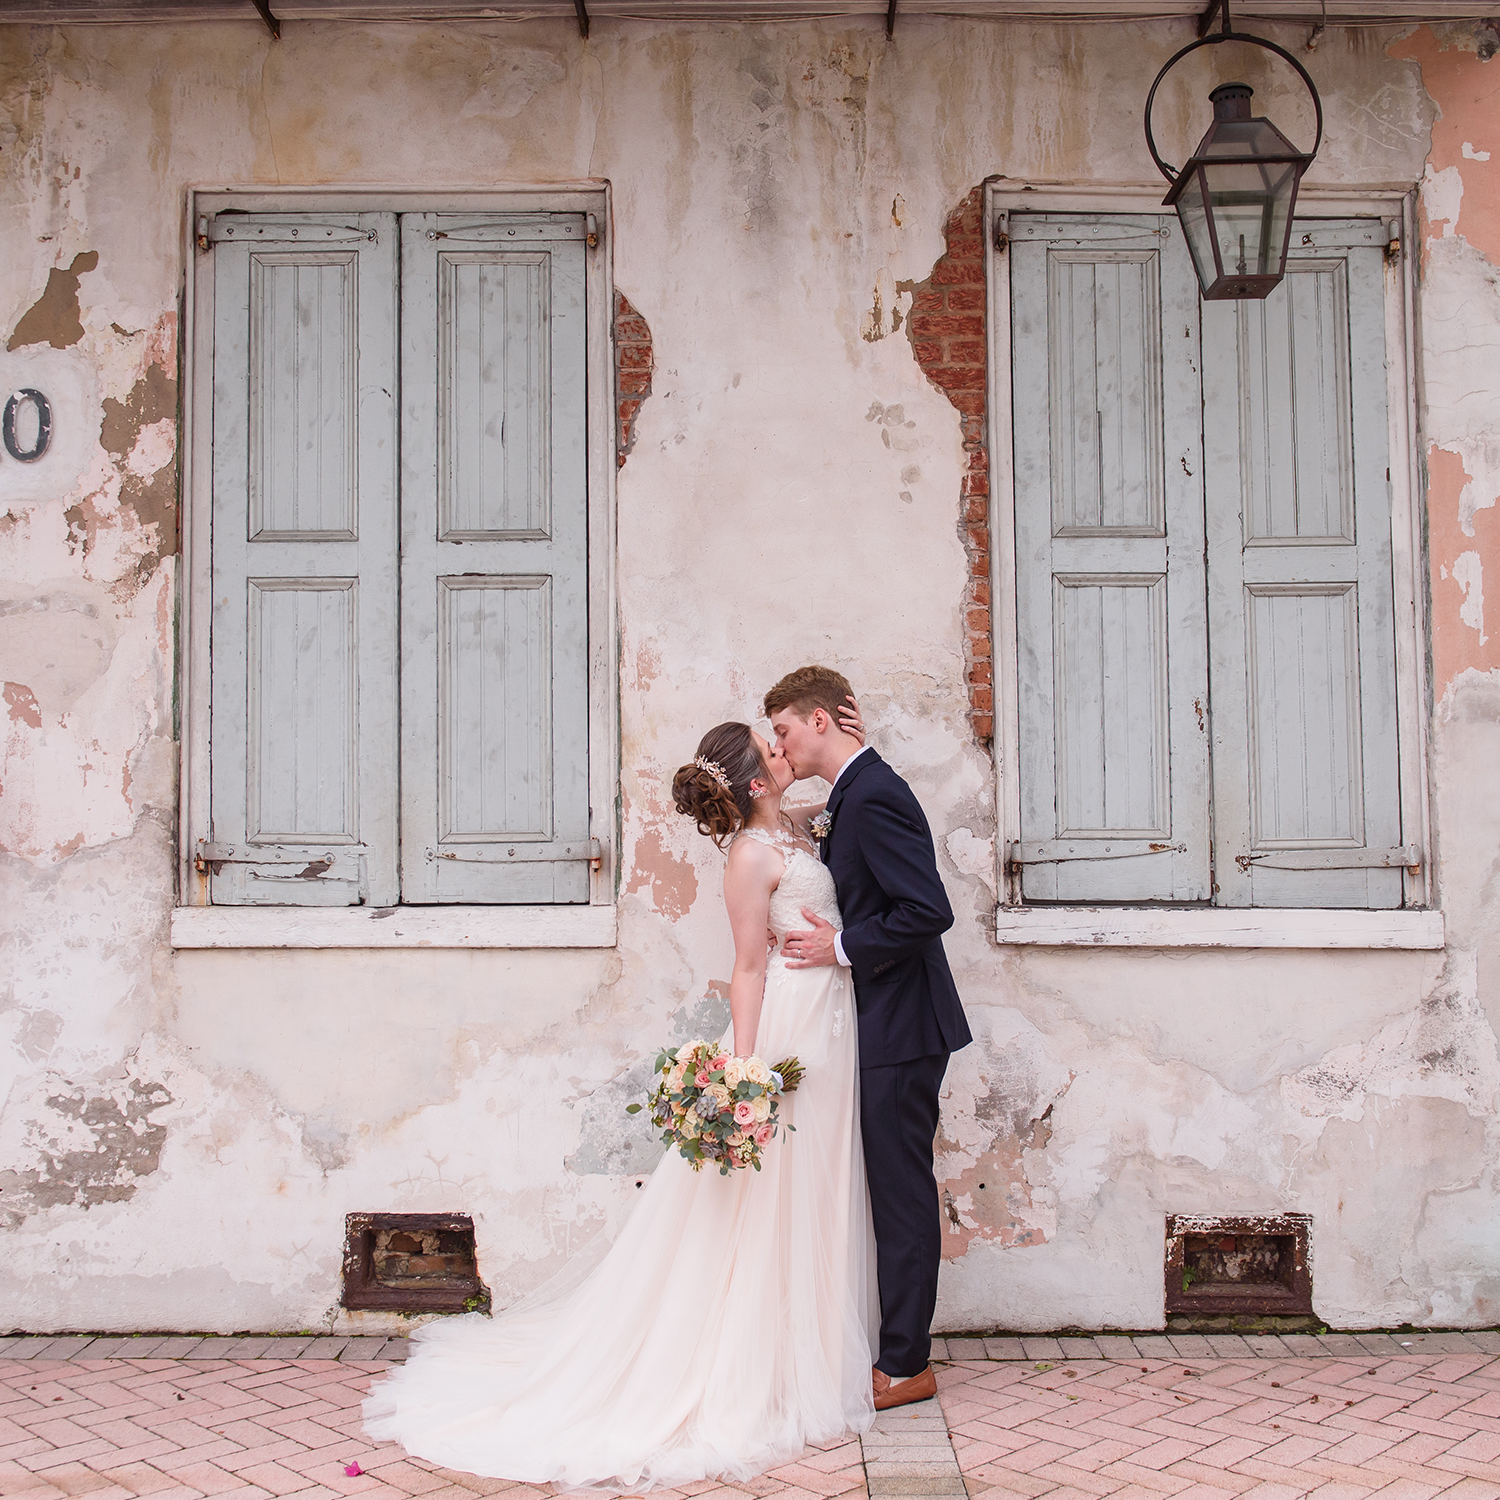 Intimate New Orleans Summer Wedding| Connor & Jacqueline